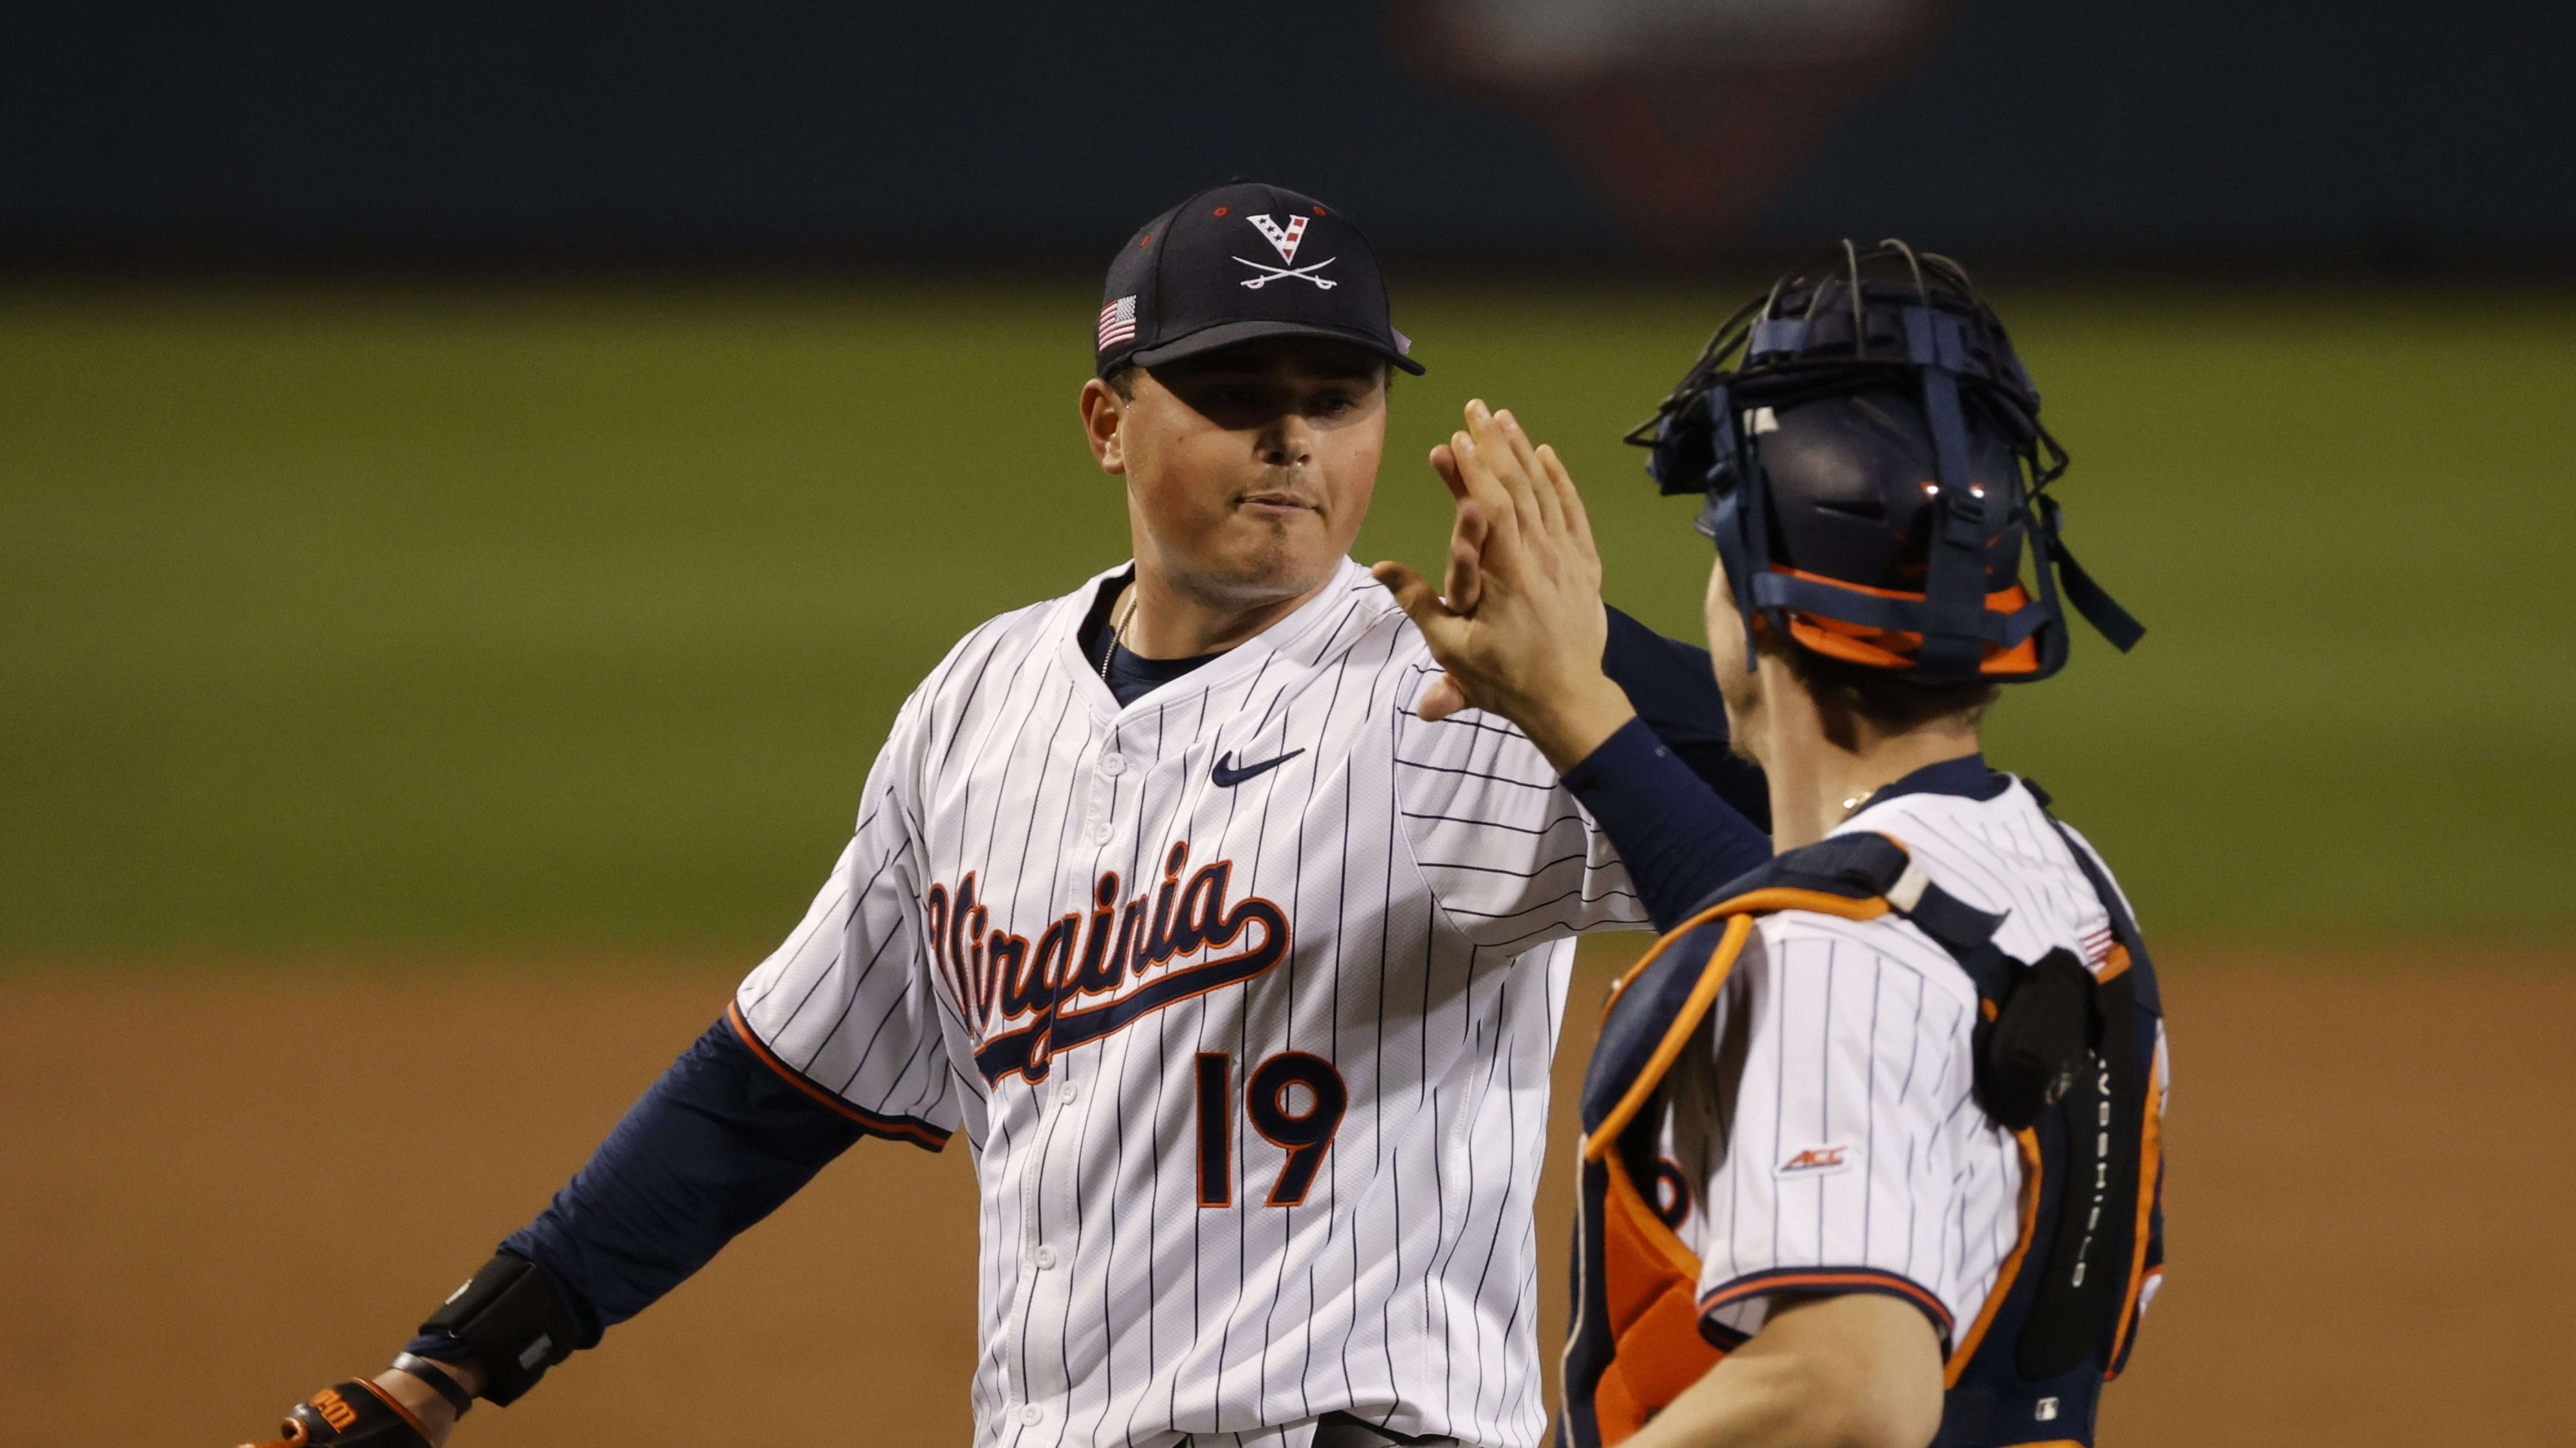 Owen Coady high fives Jacob Ference during the Virginia baseball game against Old Dominion at Disharoon Park.